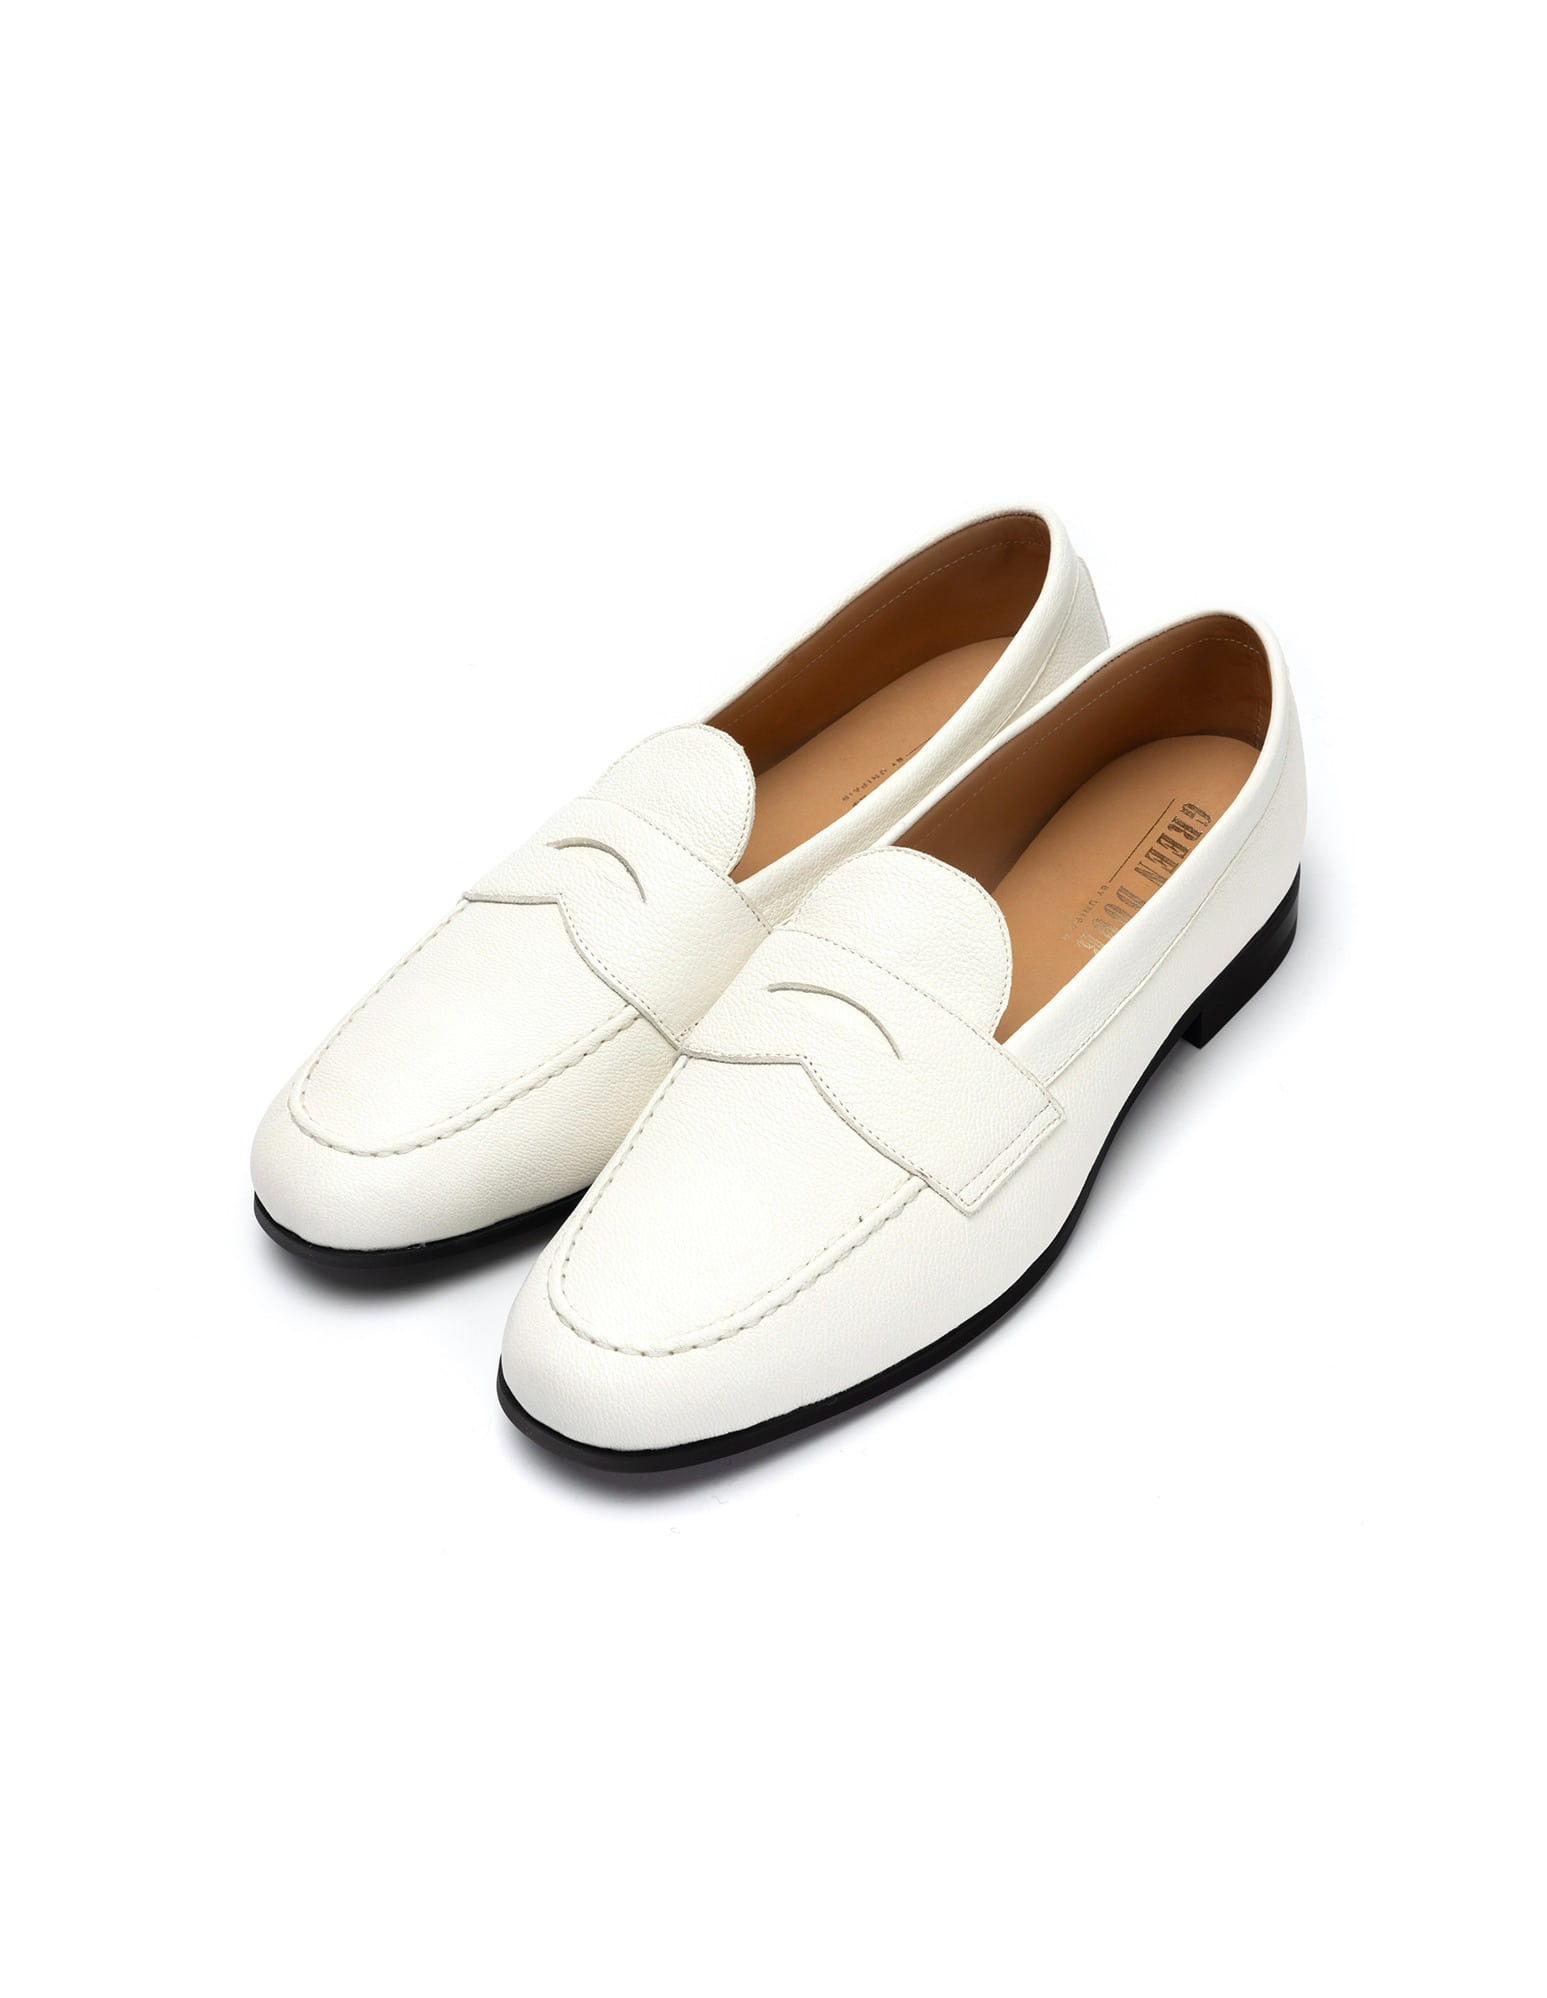 LWL(Light Weight Loafer) : Penny (White)